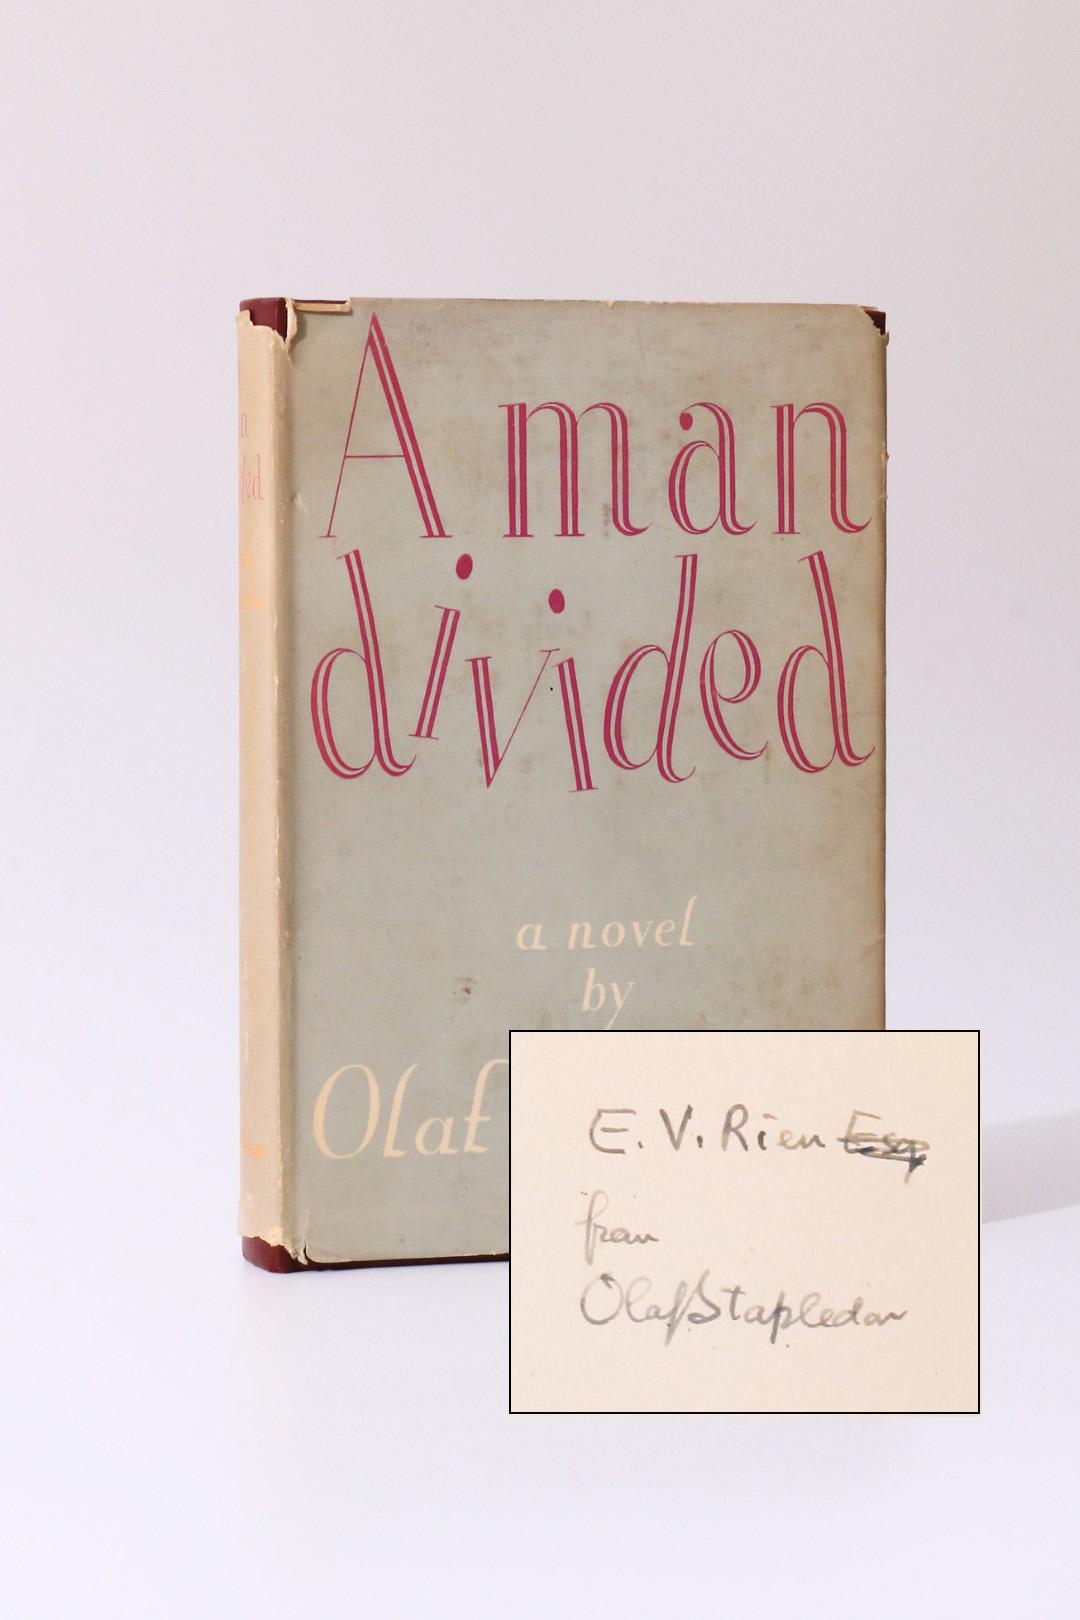 Olaf Stapledon - A Man Divided - Methuen, 1950, Signed First Edition.